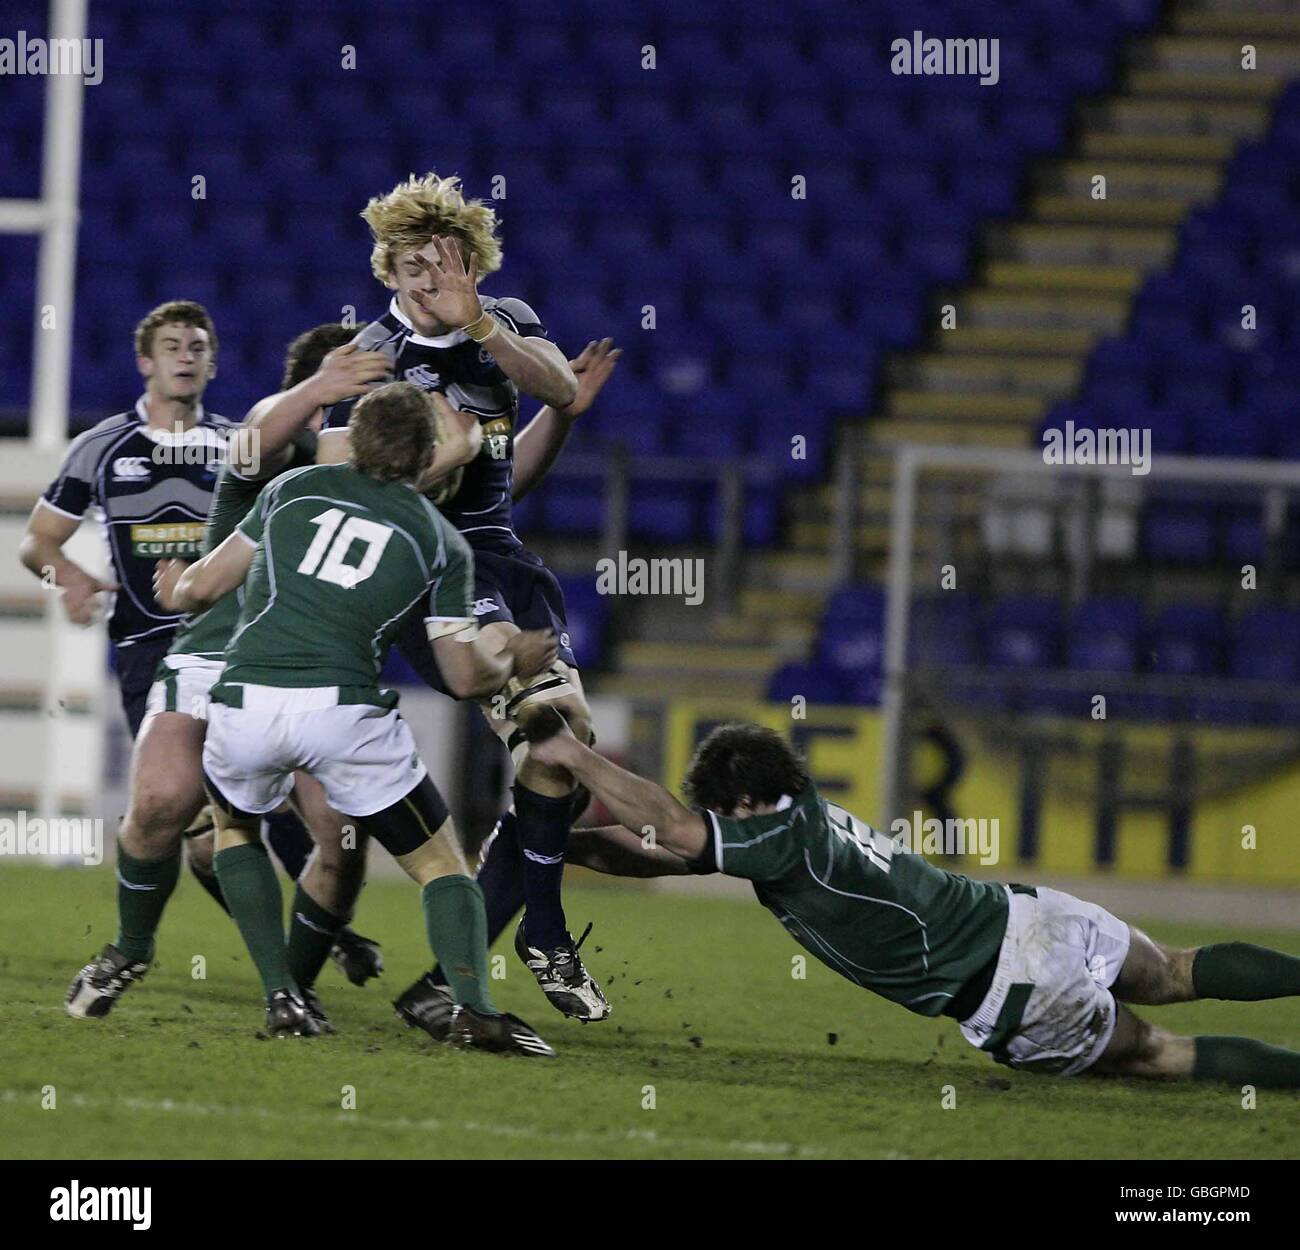 Scotland's Richard Gray (blonde hair) is tackled by Ireland's Ian Madigan (number 10) and Eamonn Sheridan (right) during the Under 20 match at McDiarmid Park, Perth Stock Photo